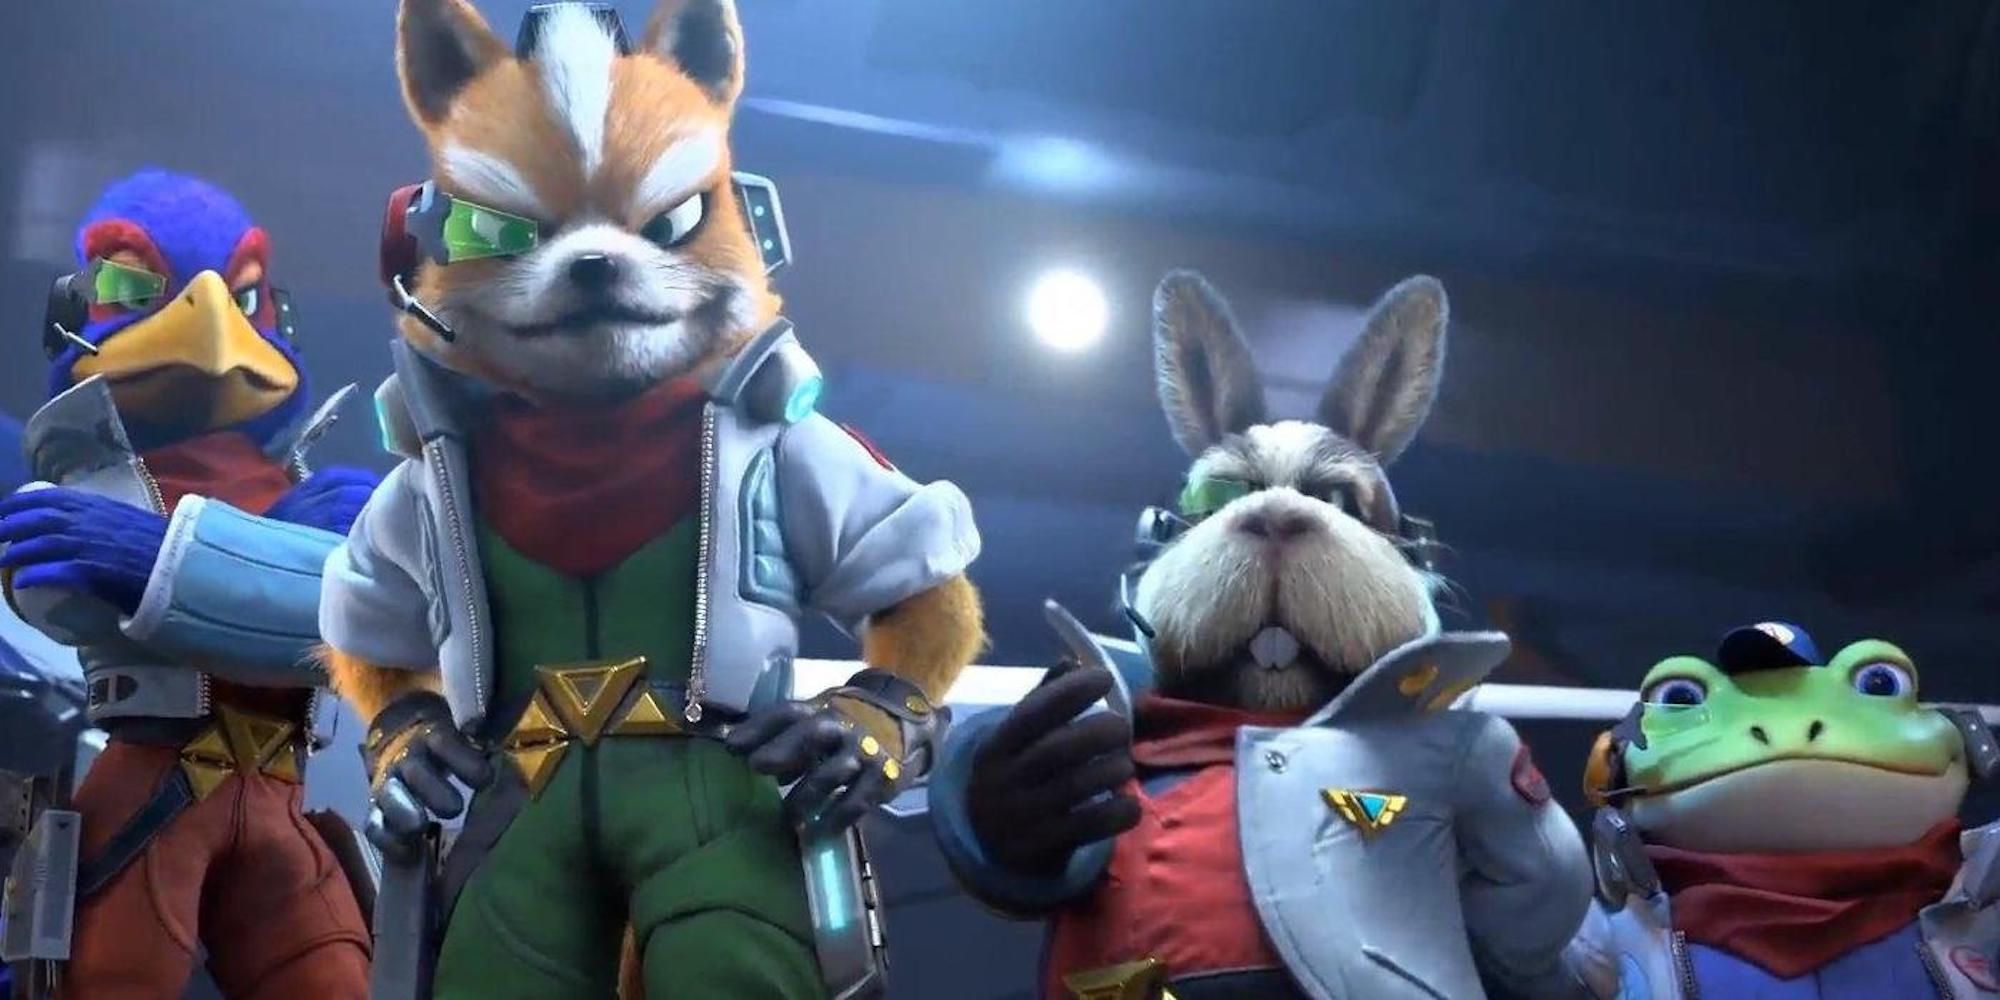 Star fox characters from Starlink